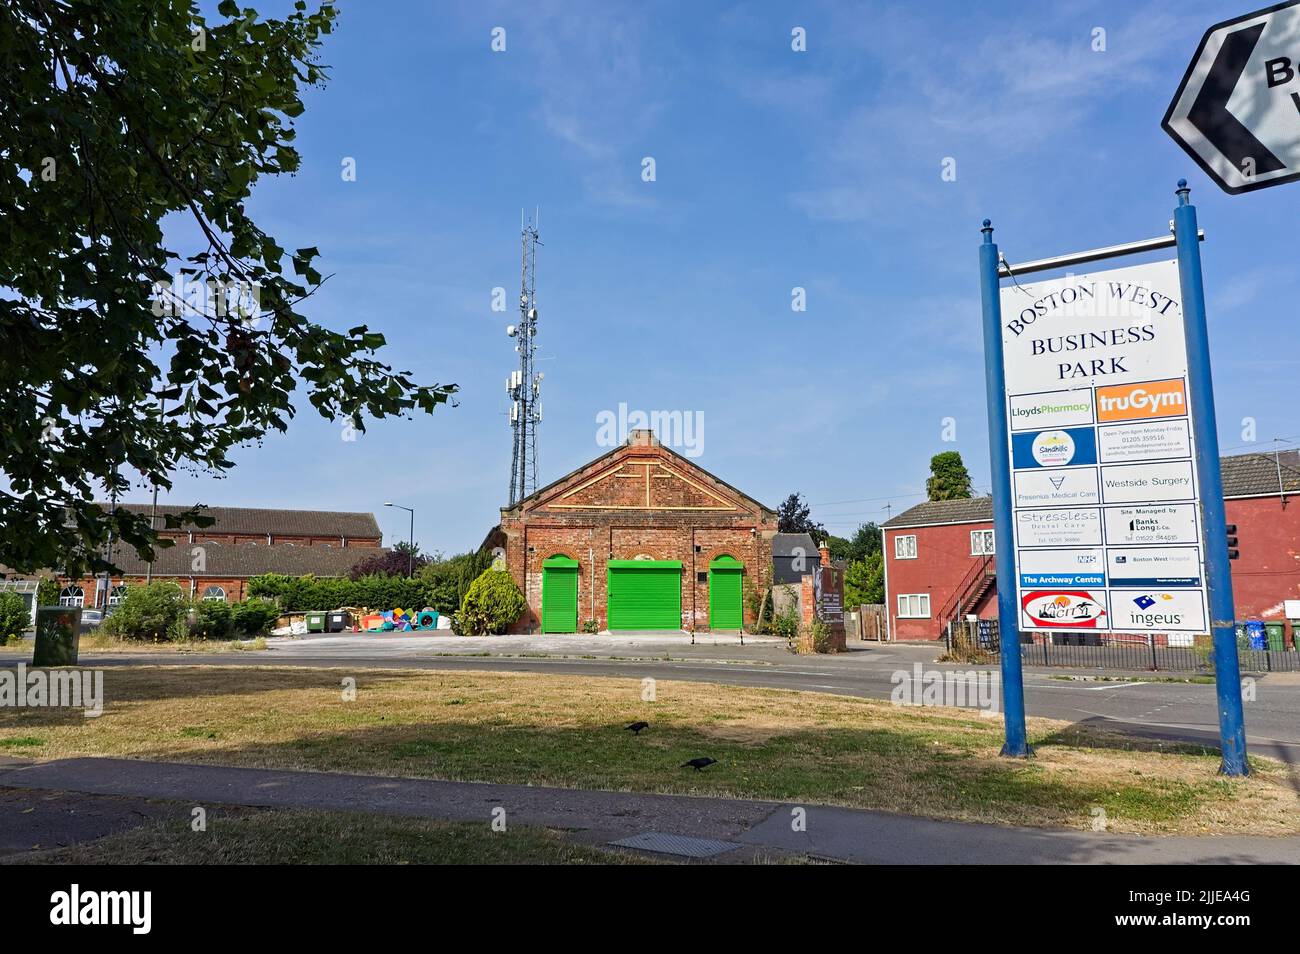 Boston West business Park with imformation sign in foreground on a sunny summer's day. Stock Photo